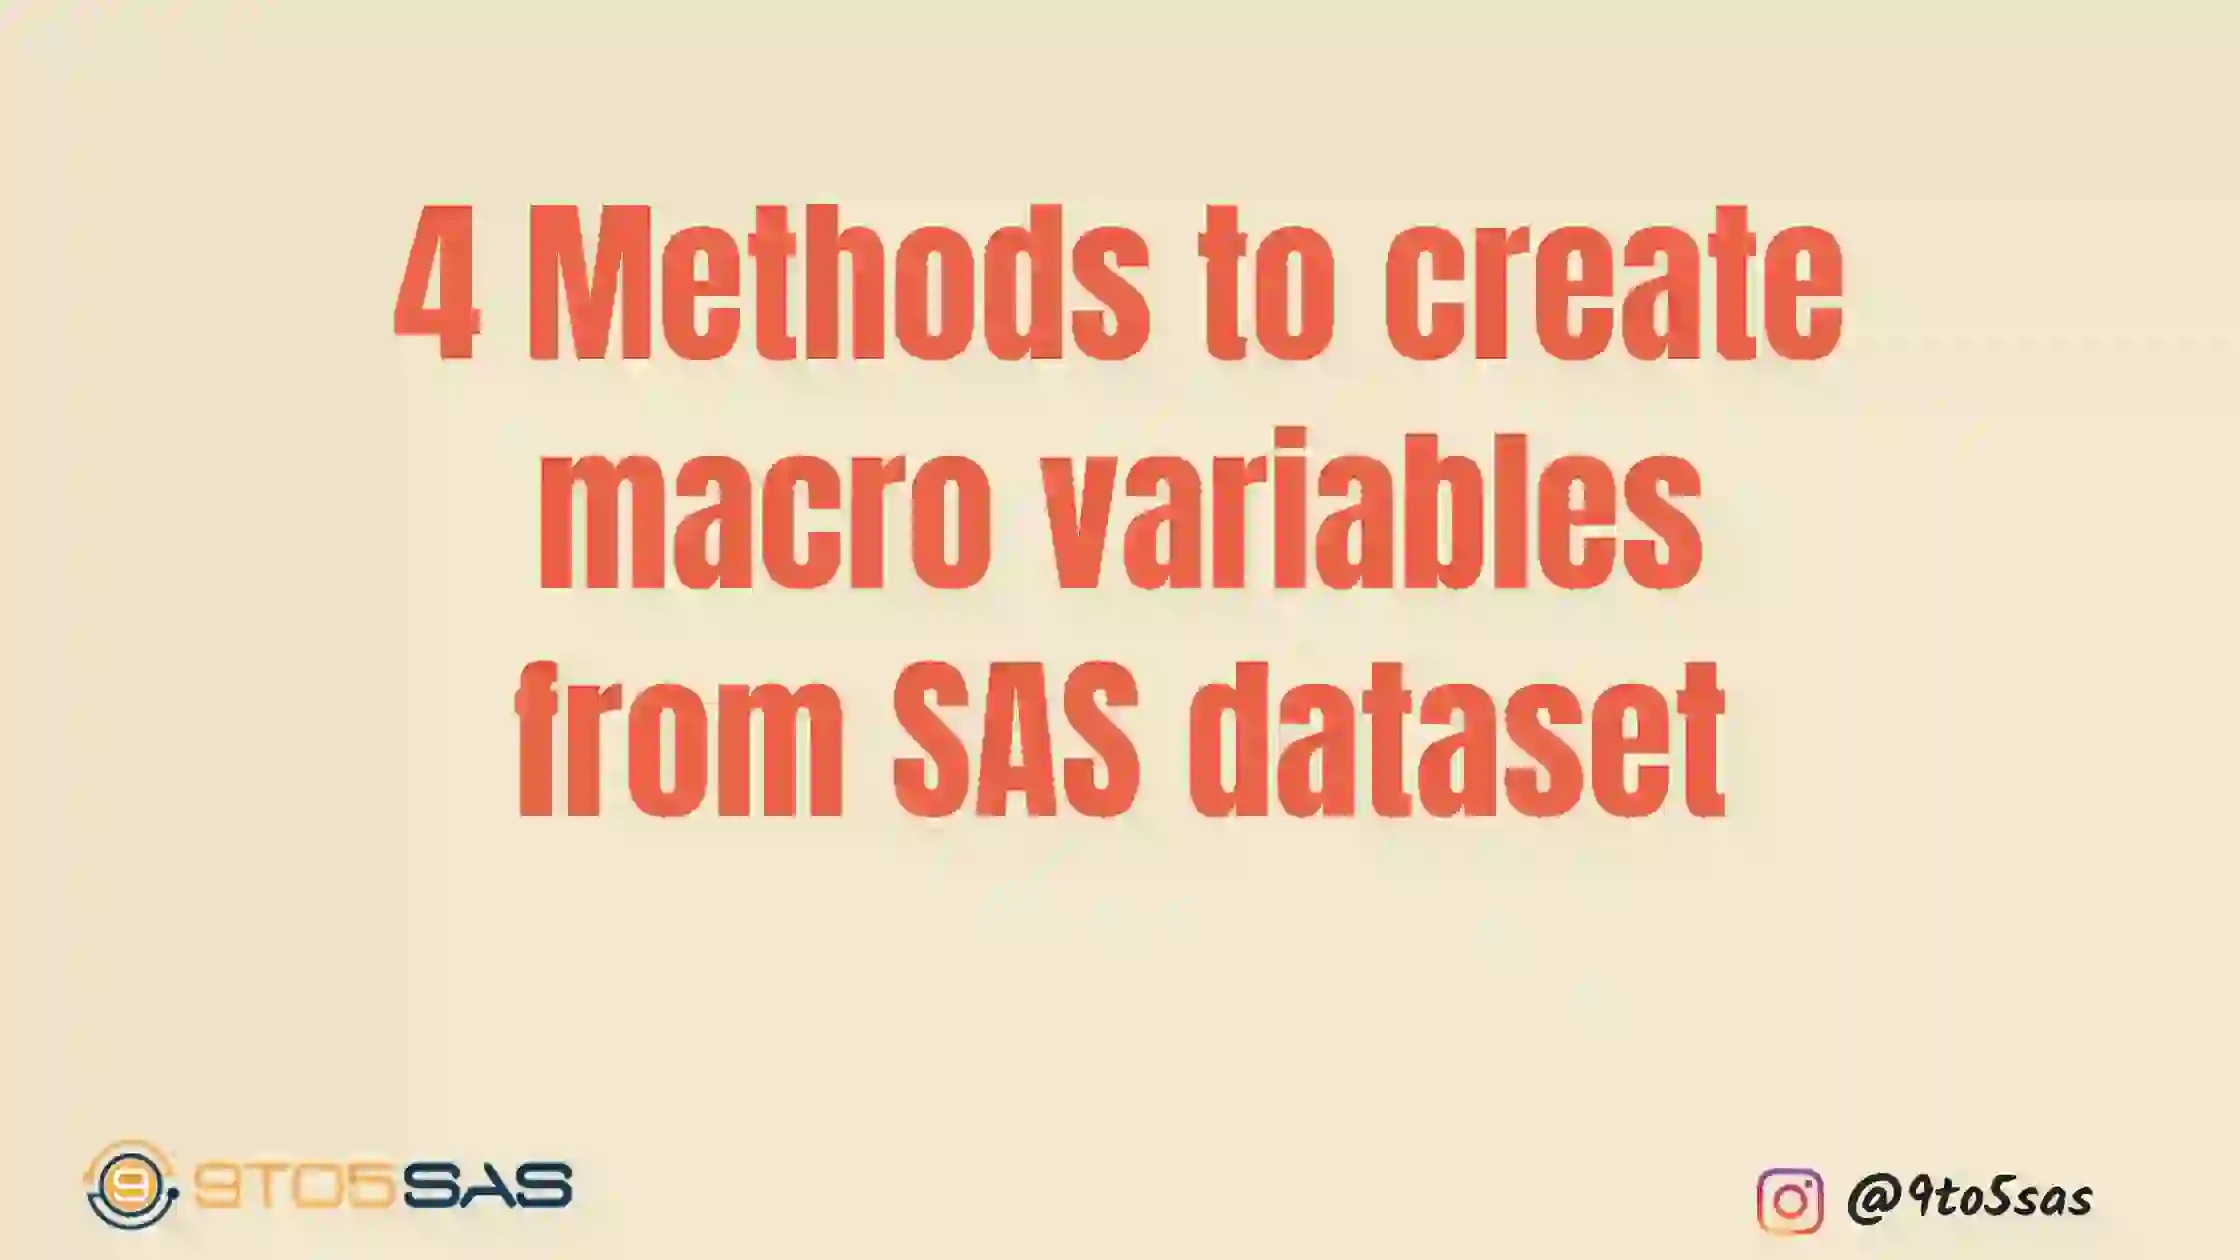 4 Methods to create macro variables from SAS dataset